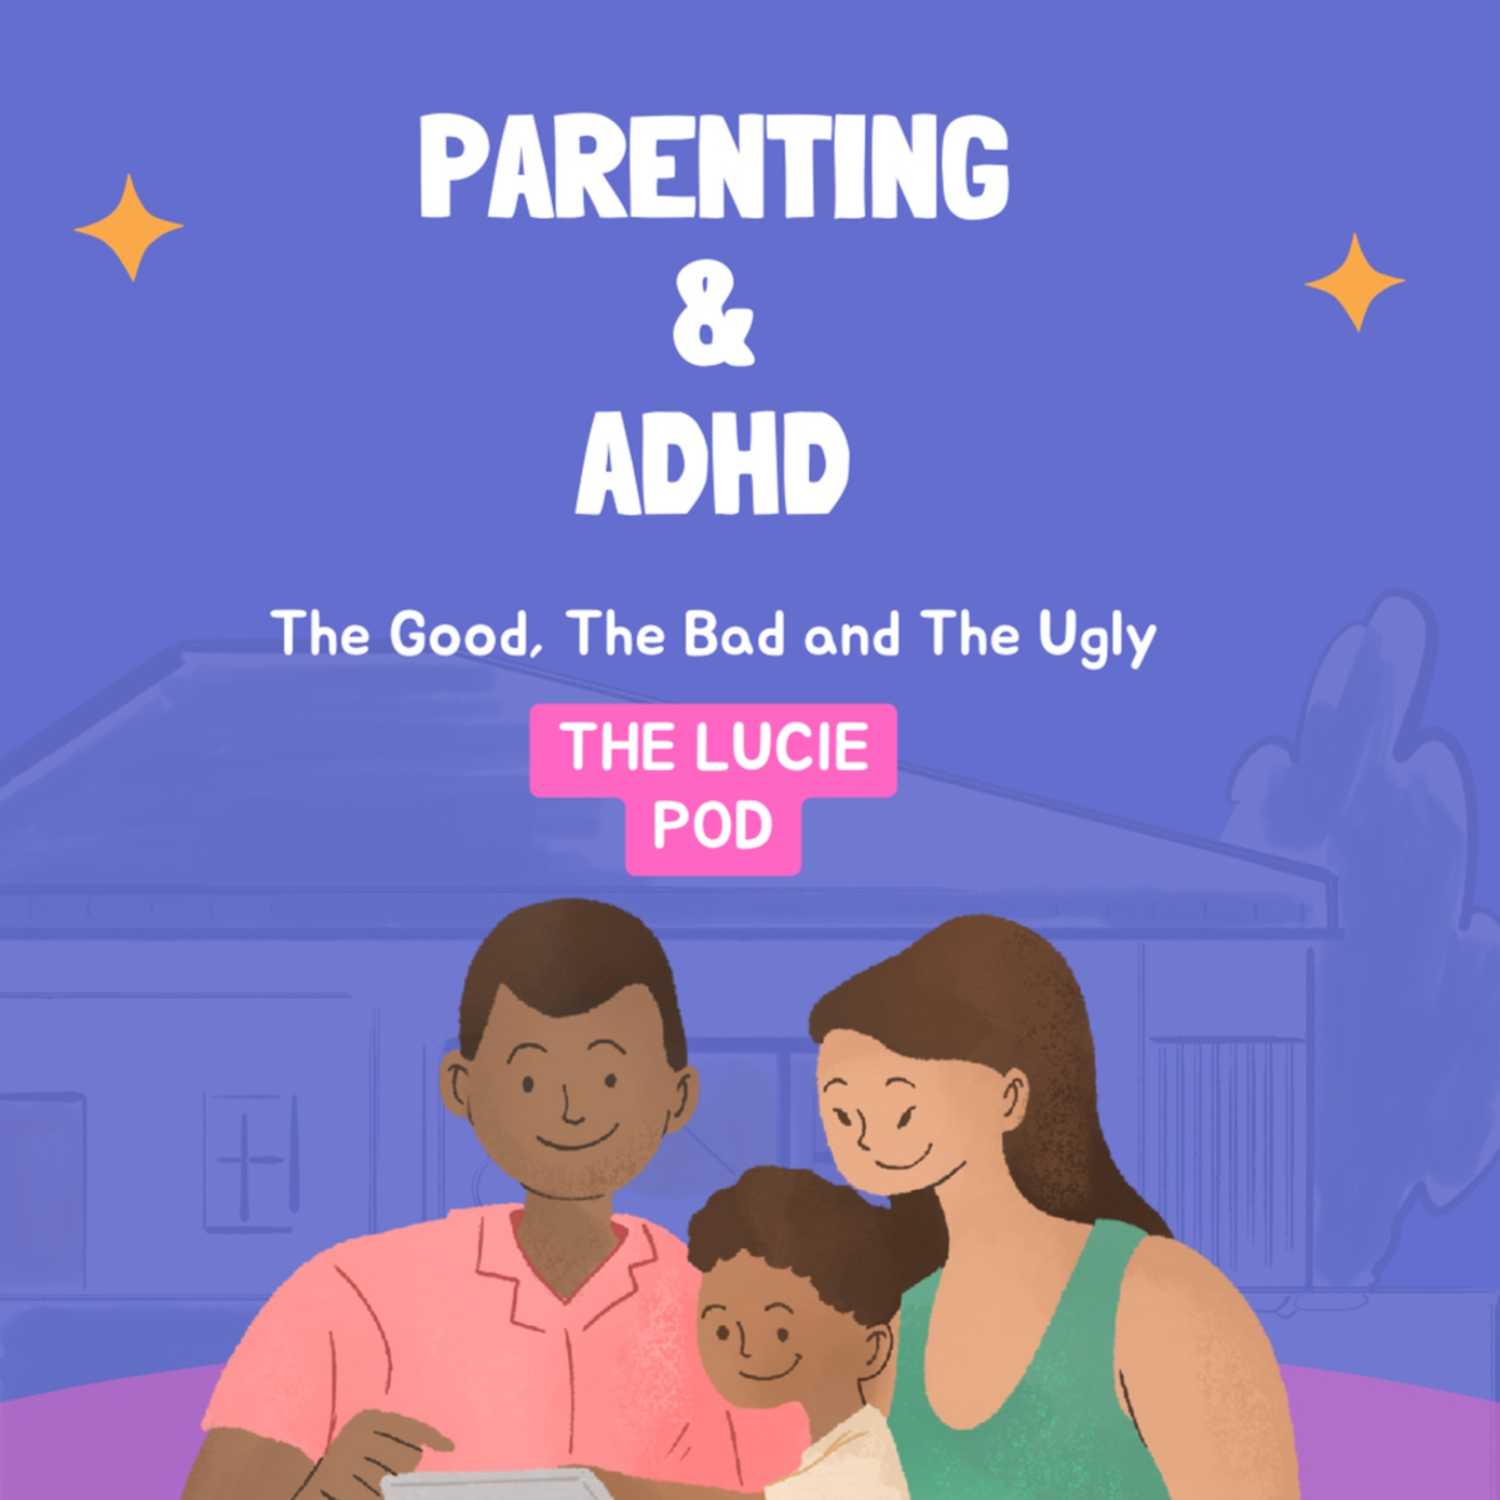 Parenting & ADHD: The Good, The Bad and The Ugly